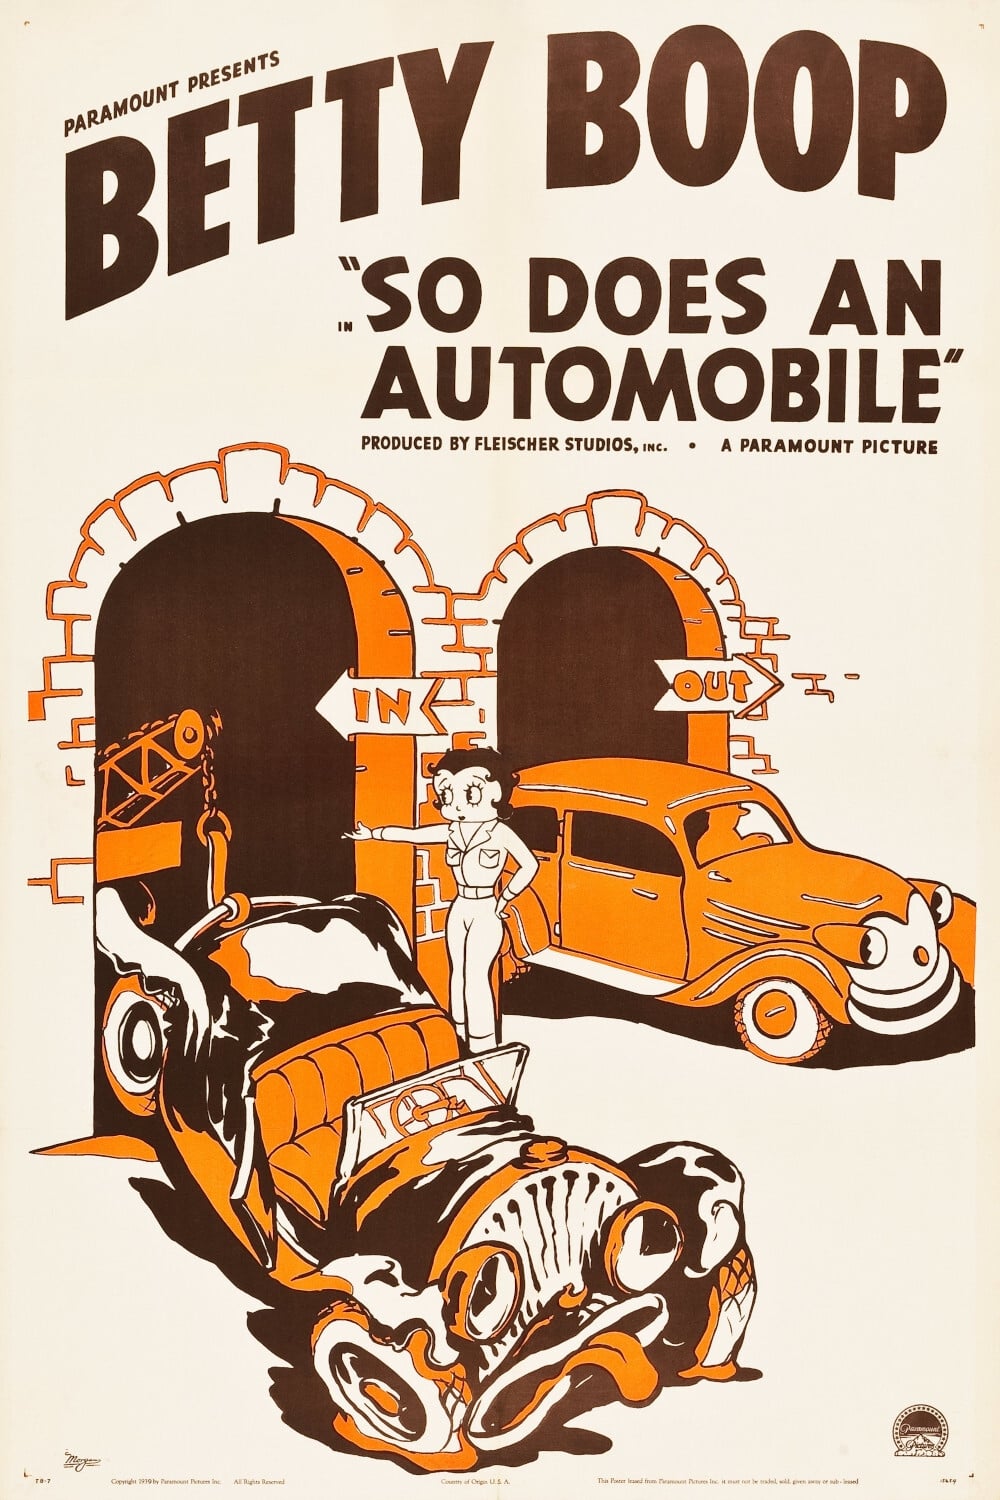 So Does an Automobile